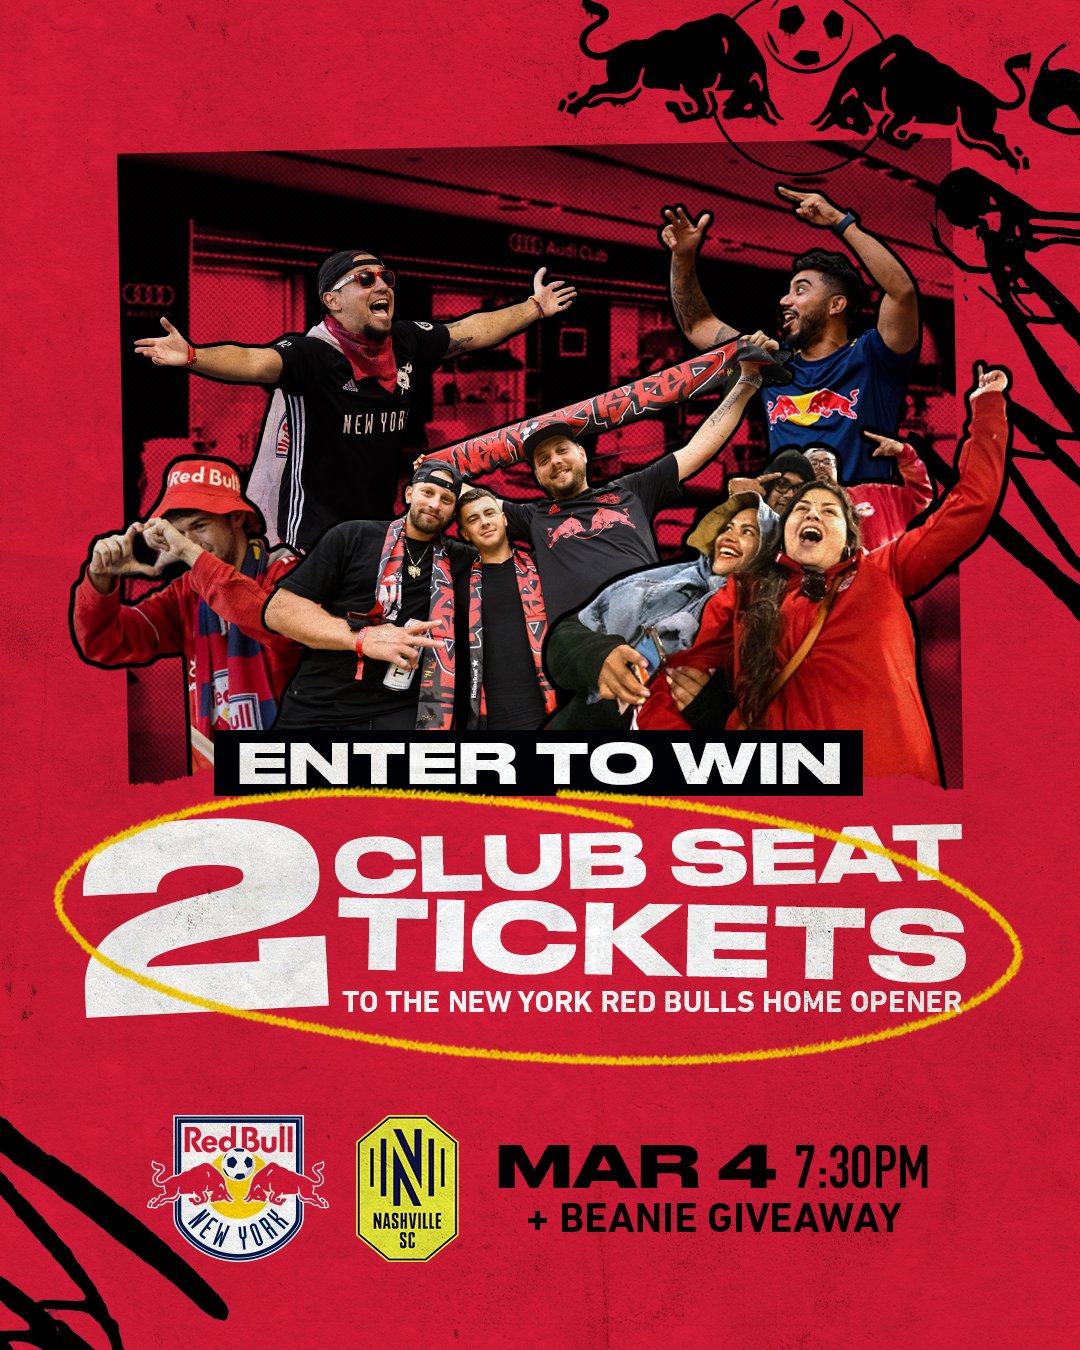 York Red Bulls on Twitter: "‼️ The perfect way to kick off the home season ‼️ Comment and tag a friend for chance to win two club tickets to